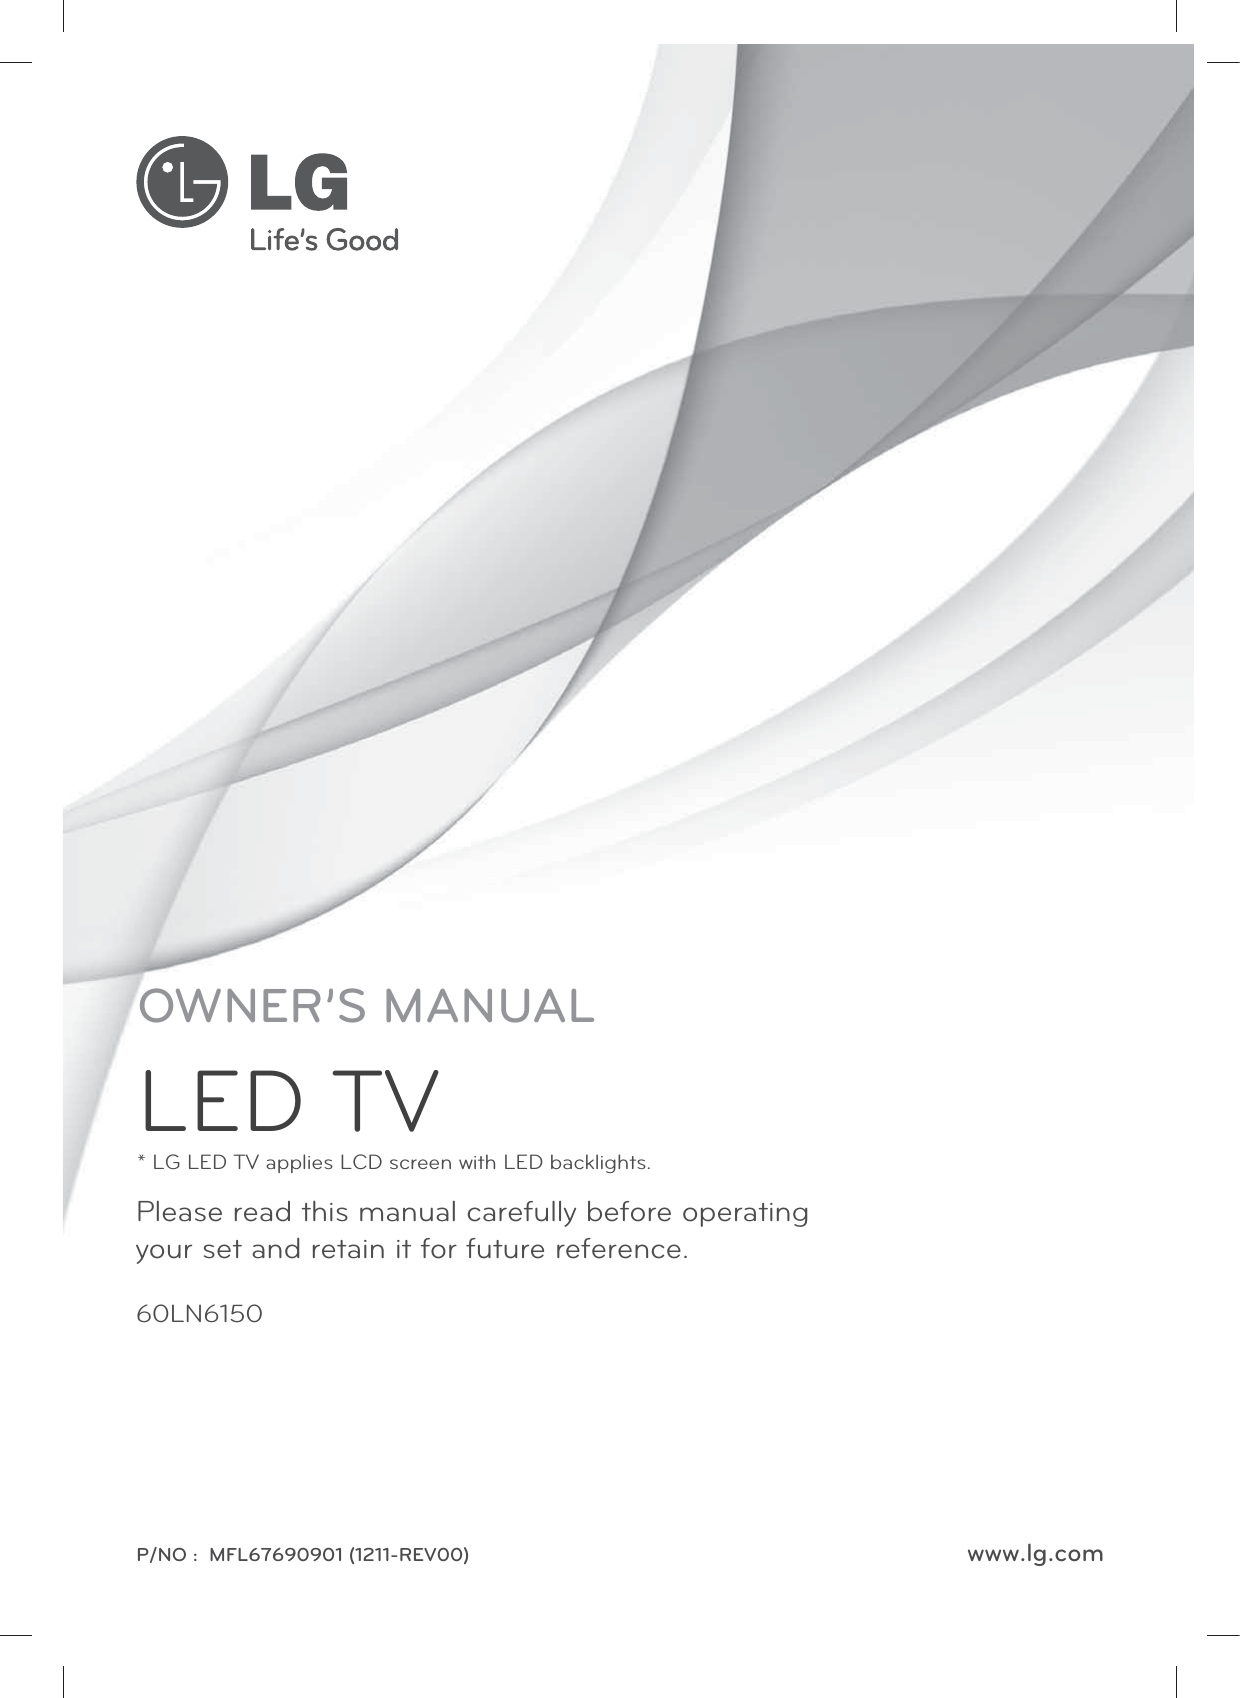 www.lg.comP/NO :  MFL67690901 (1211-REV00)60LN6150Please read this manual carefully before operating your set and retain it for future reference.OWNER’S MANUALLED TV* LG LED TV applies LCD screen with LED backlights.